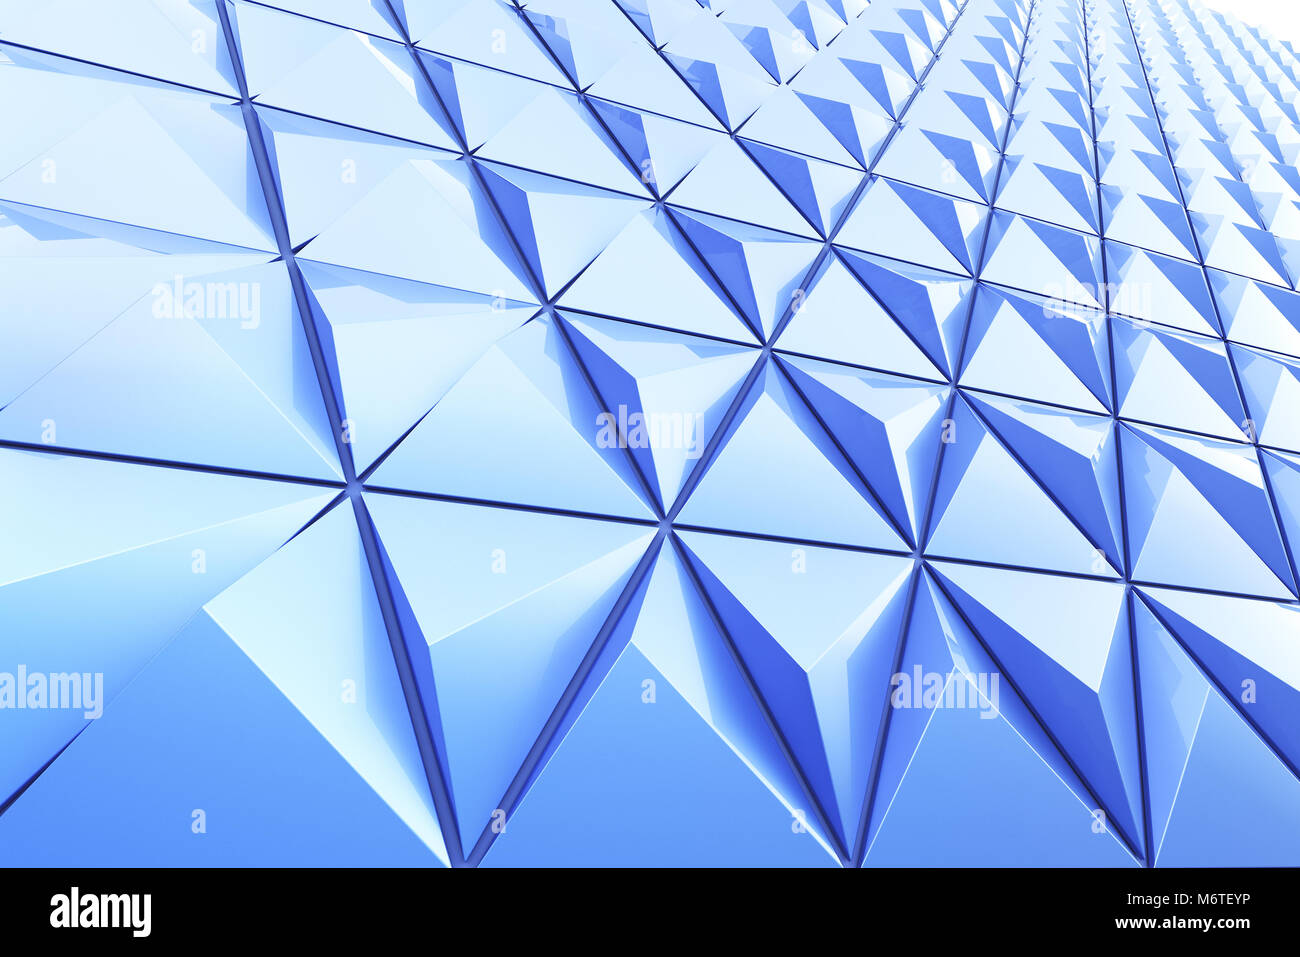 Abstract background of polygonal shape Stock Photo